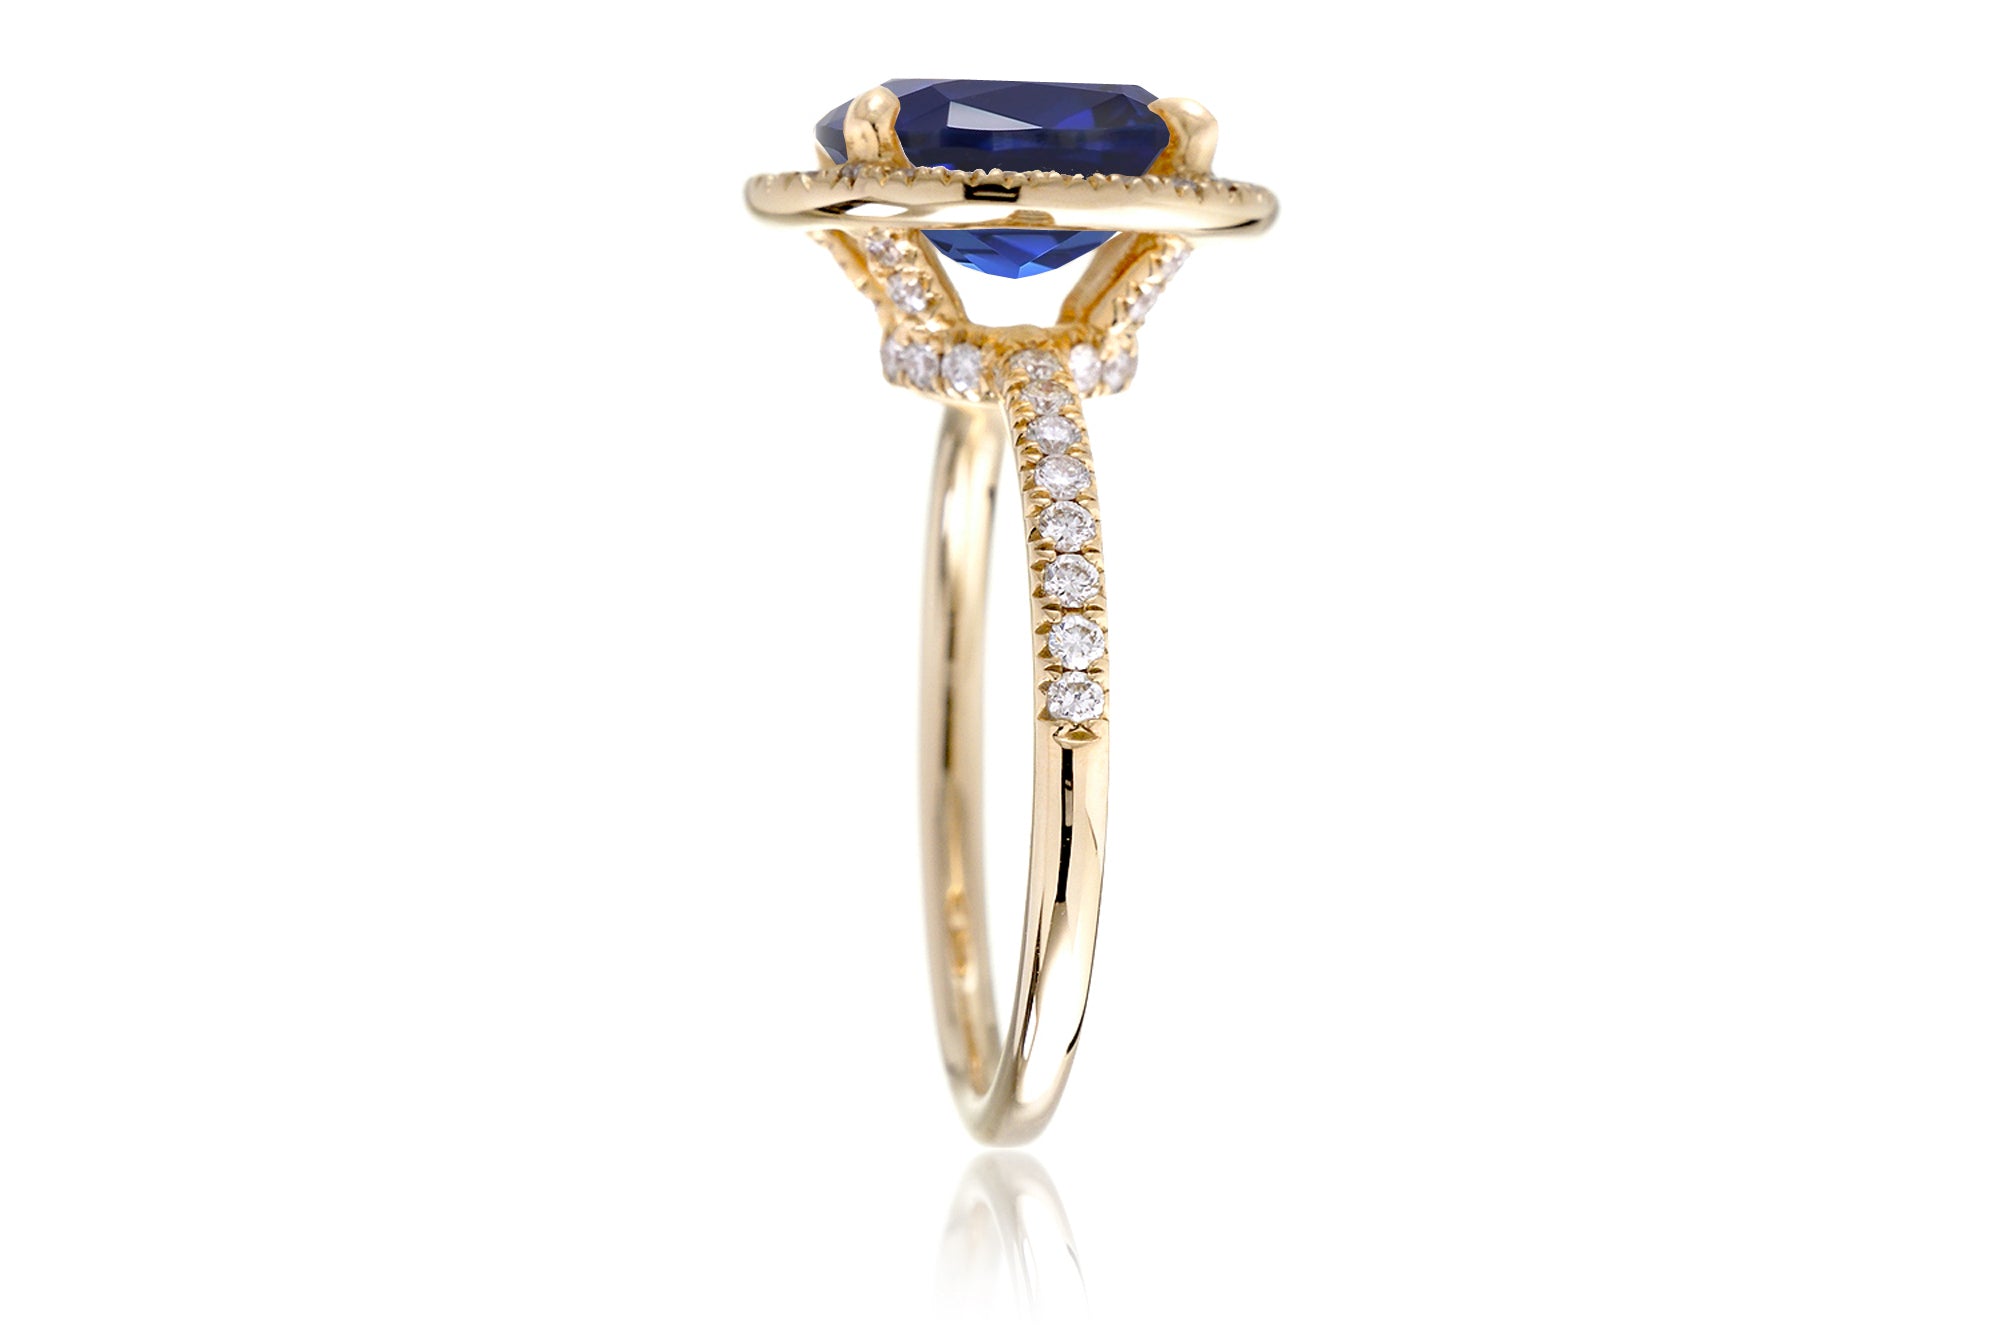 Oval sapphire diamond halo and band wedding rings yellow gold